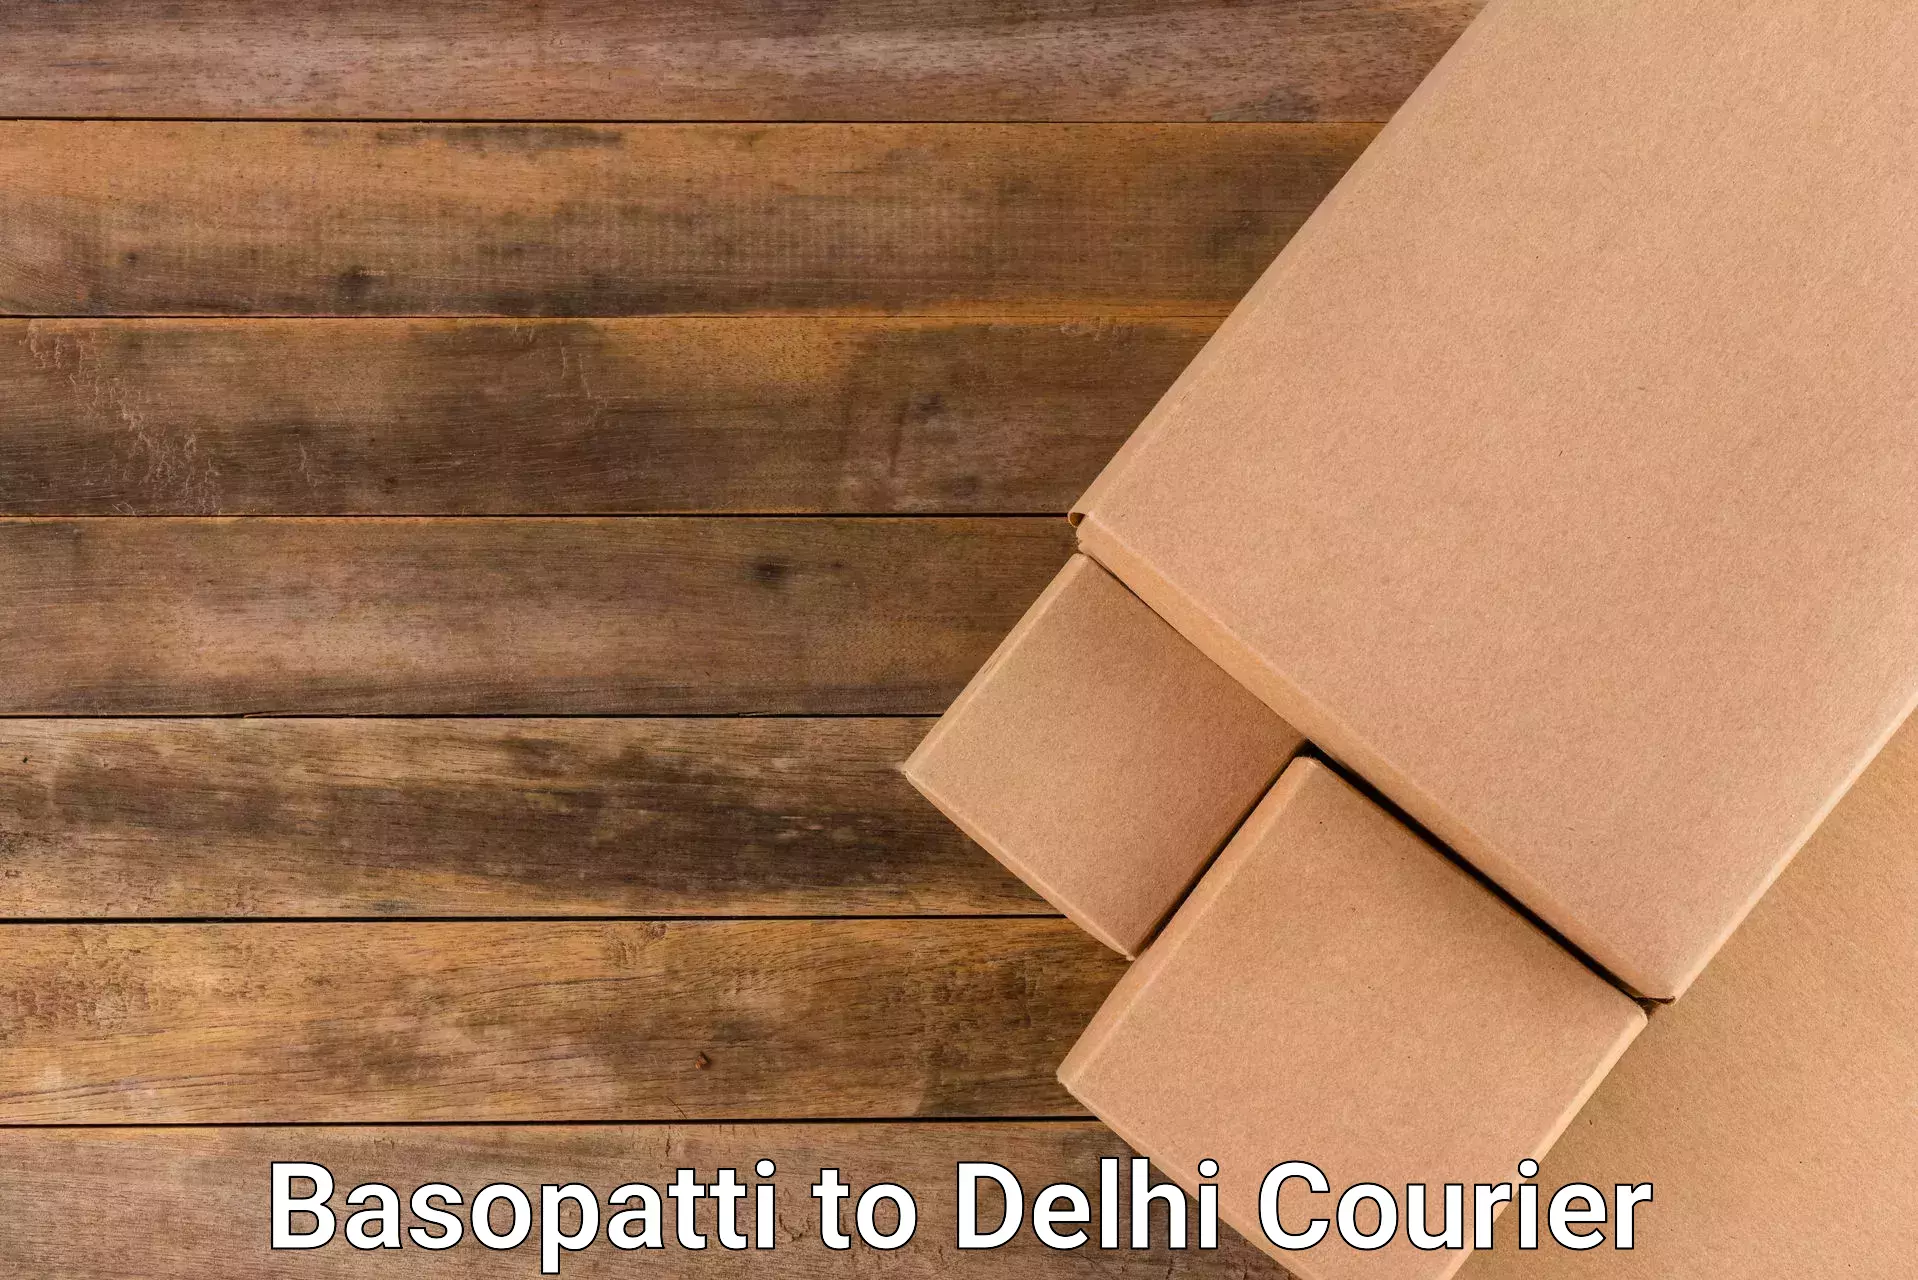 State-of-the-art courier technology Basopatti to NIT Delhi